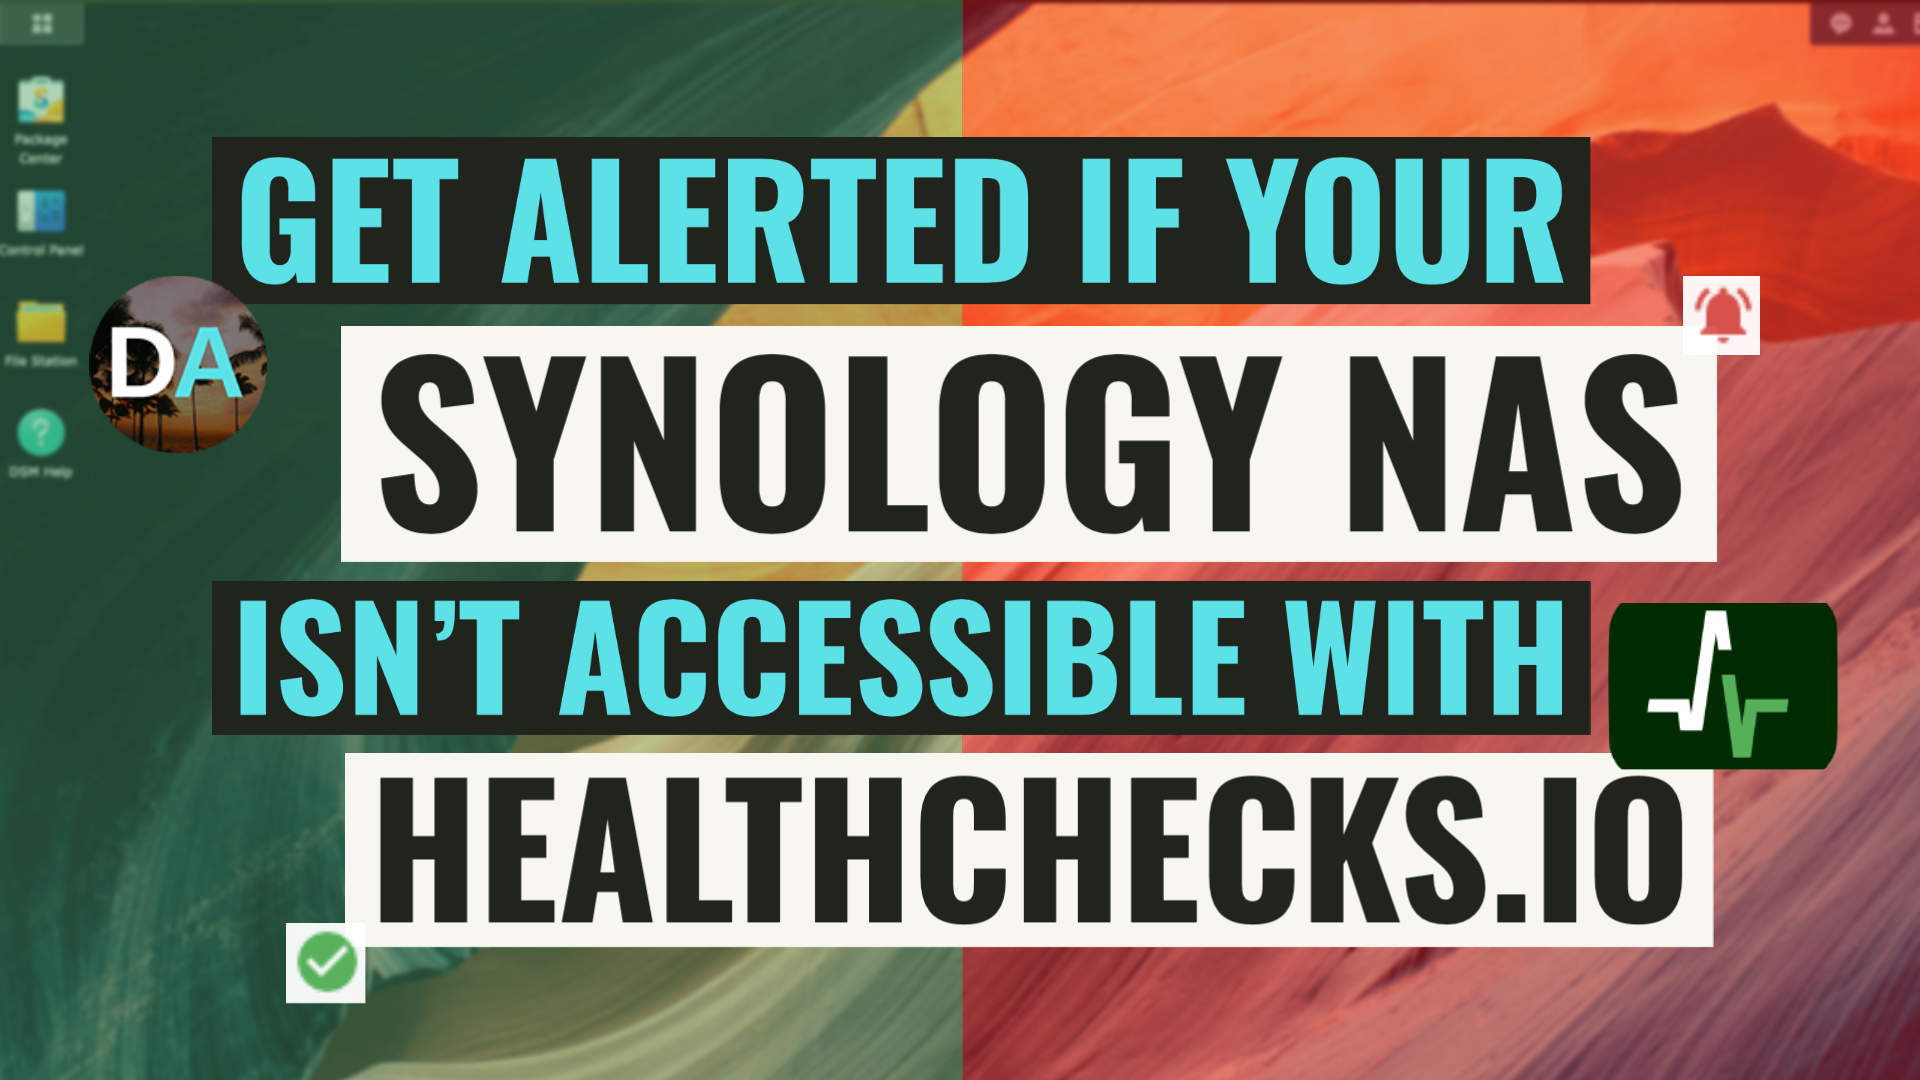 Monitor Your Synology NAS And Get Alerted If Problems Occurs With Healthchecks.io